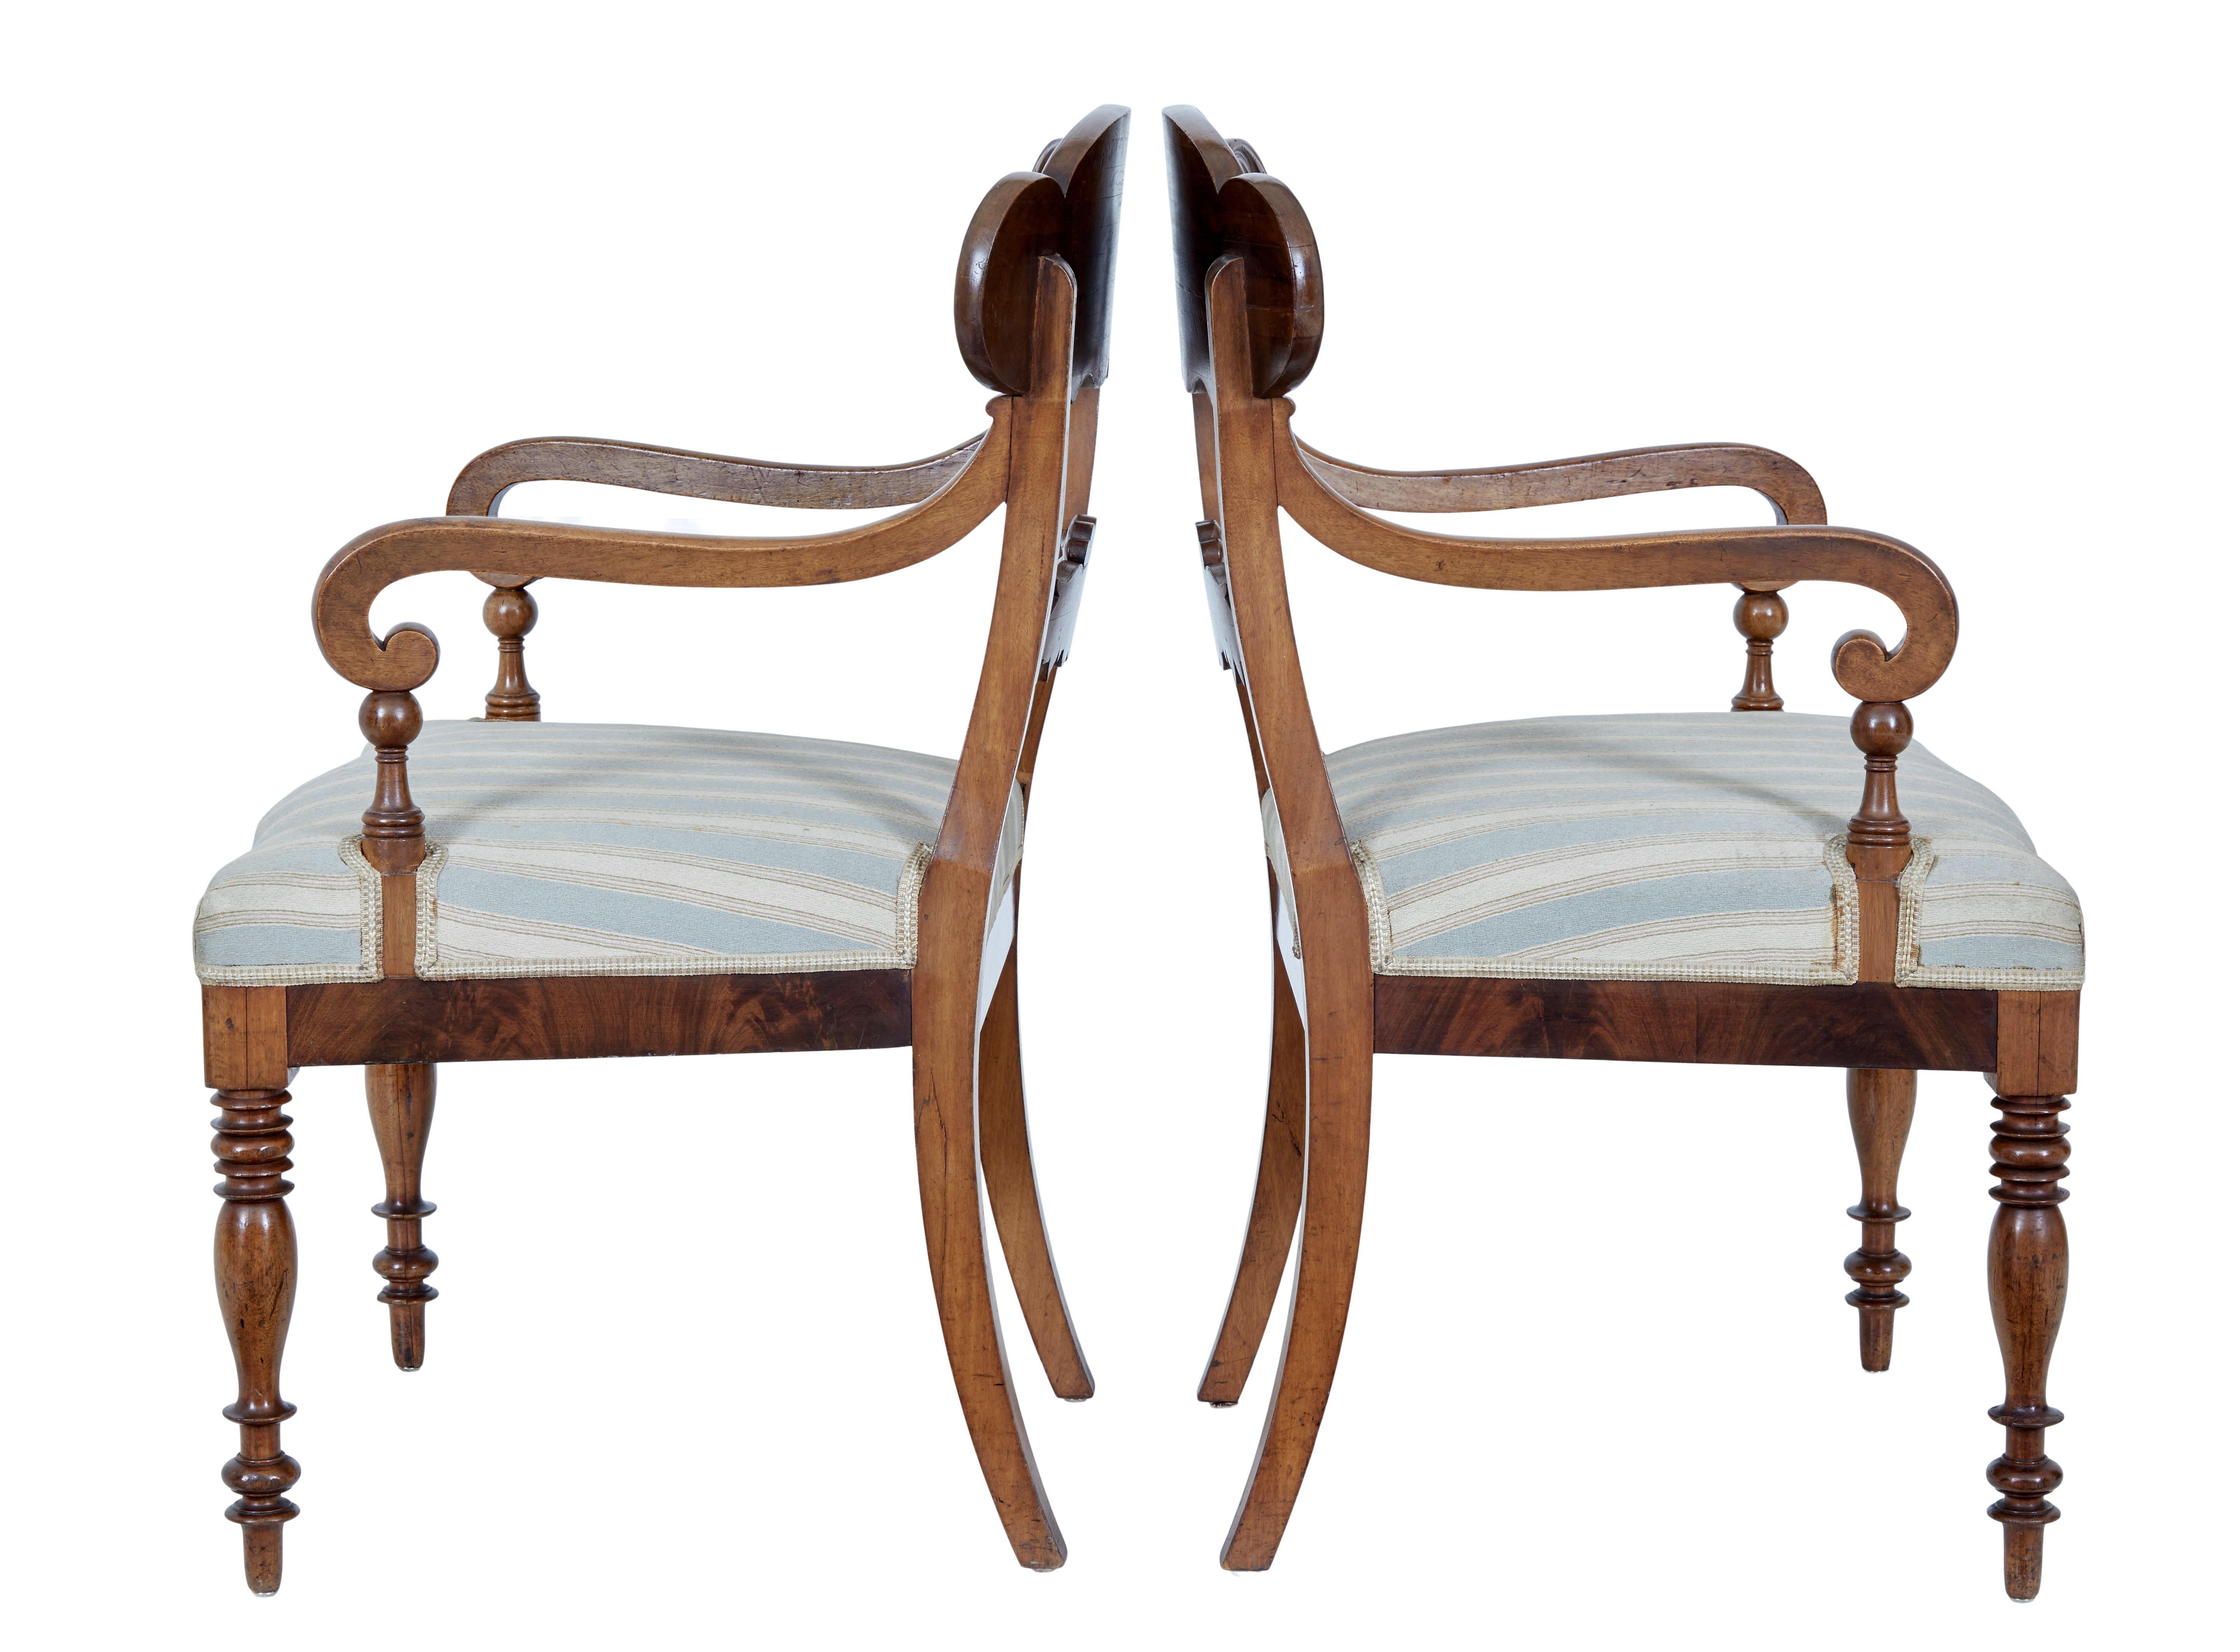 Pair of 19th century carved mahogany armchairs circa 1890.

Good quality pair of empire revival armchairs from Sweden. Shaped back rest veneered in flame mahogany with carved acanthus leaf detailing, further carved lower back support. Scrolling